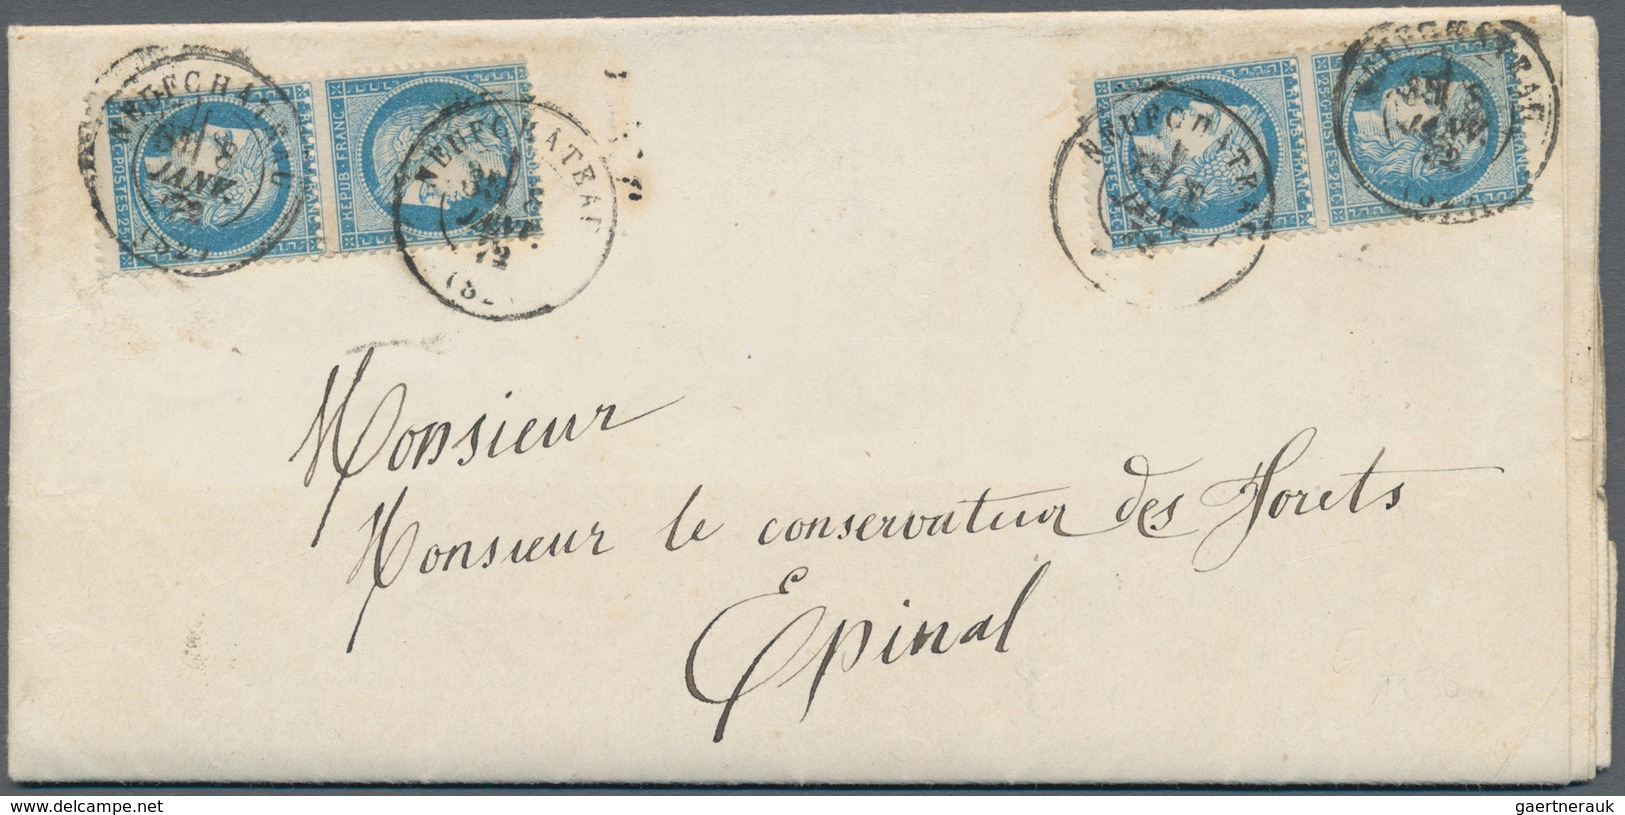 01436 Frankreich: 1849-1870's "FRENCH POSTAL HISTORY": Collection of more than 30 special, attractive, sca